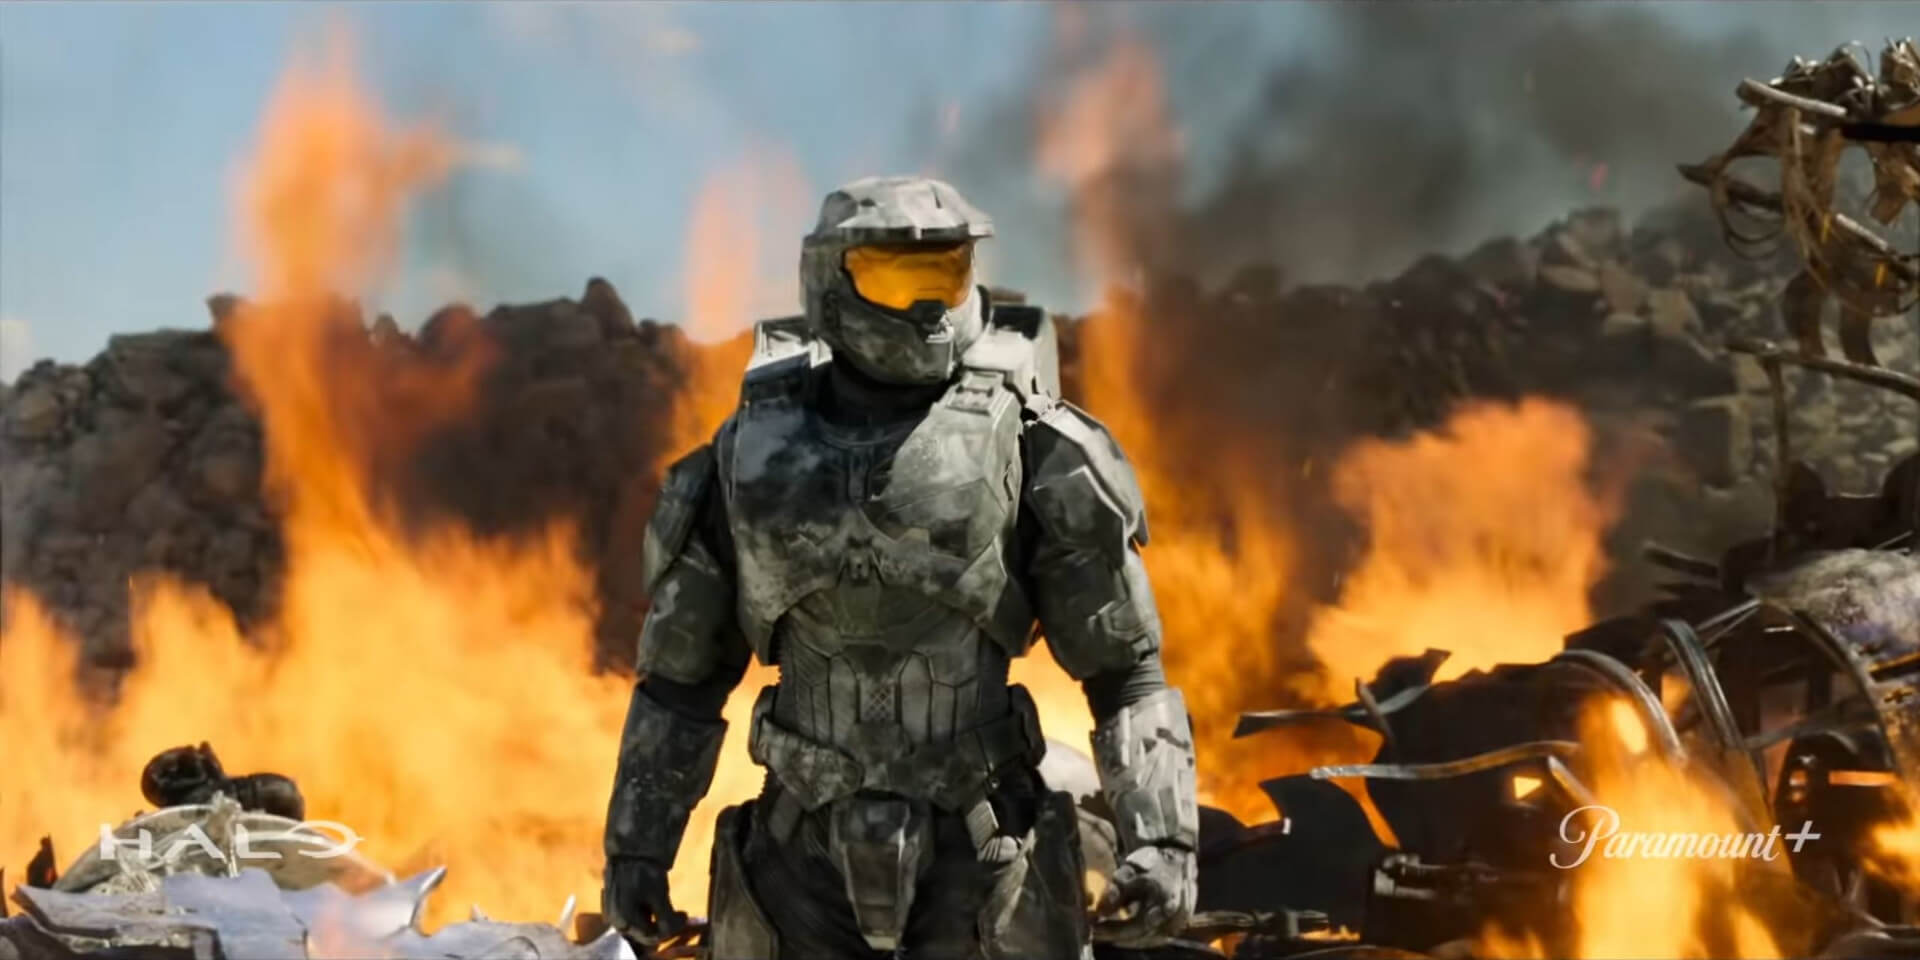 Master Chief in the upcoming Halo TV series, which could be blocked by a Halo music lawsuit